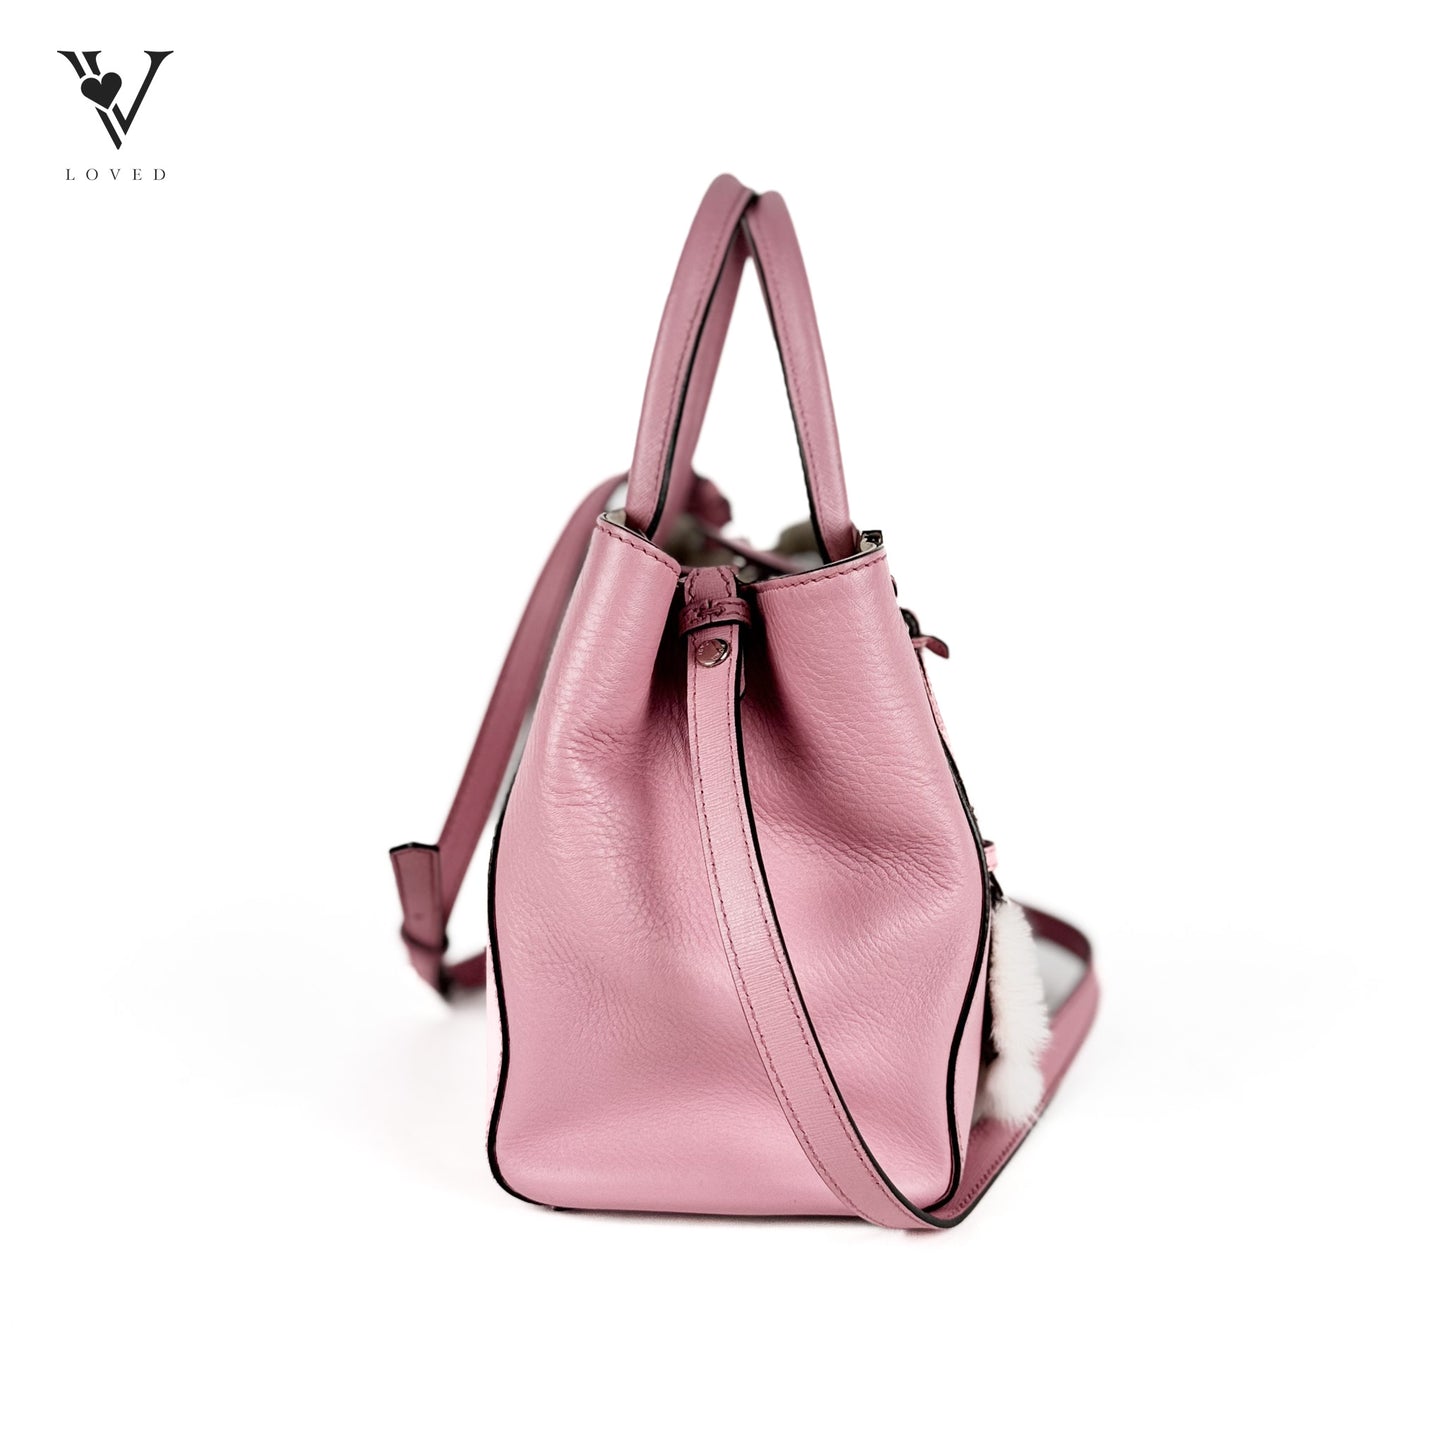 2Jours in Pink Saffiano Leather